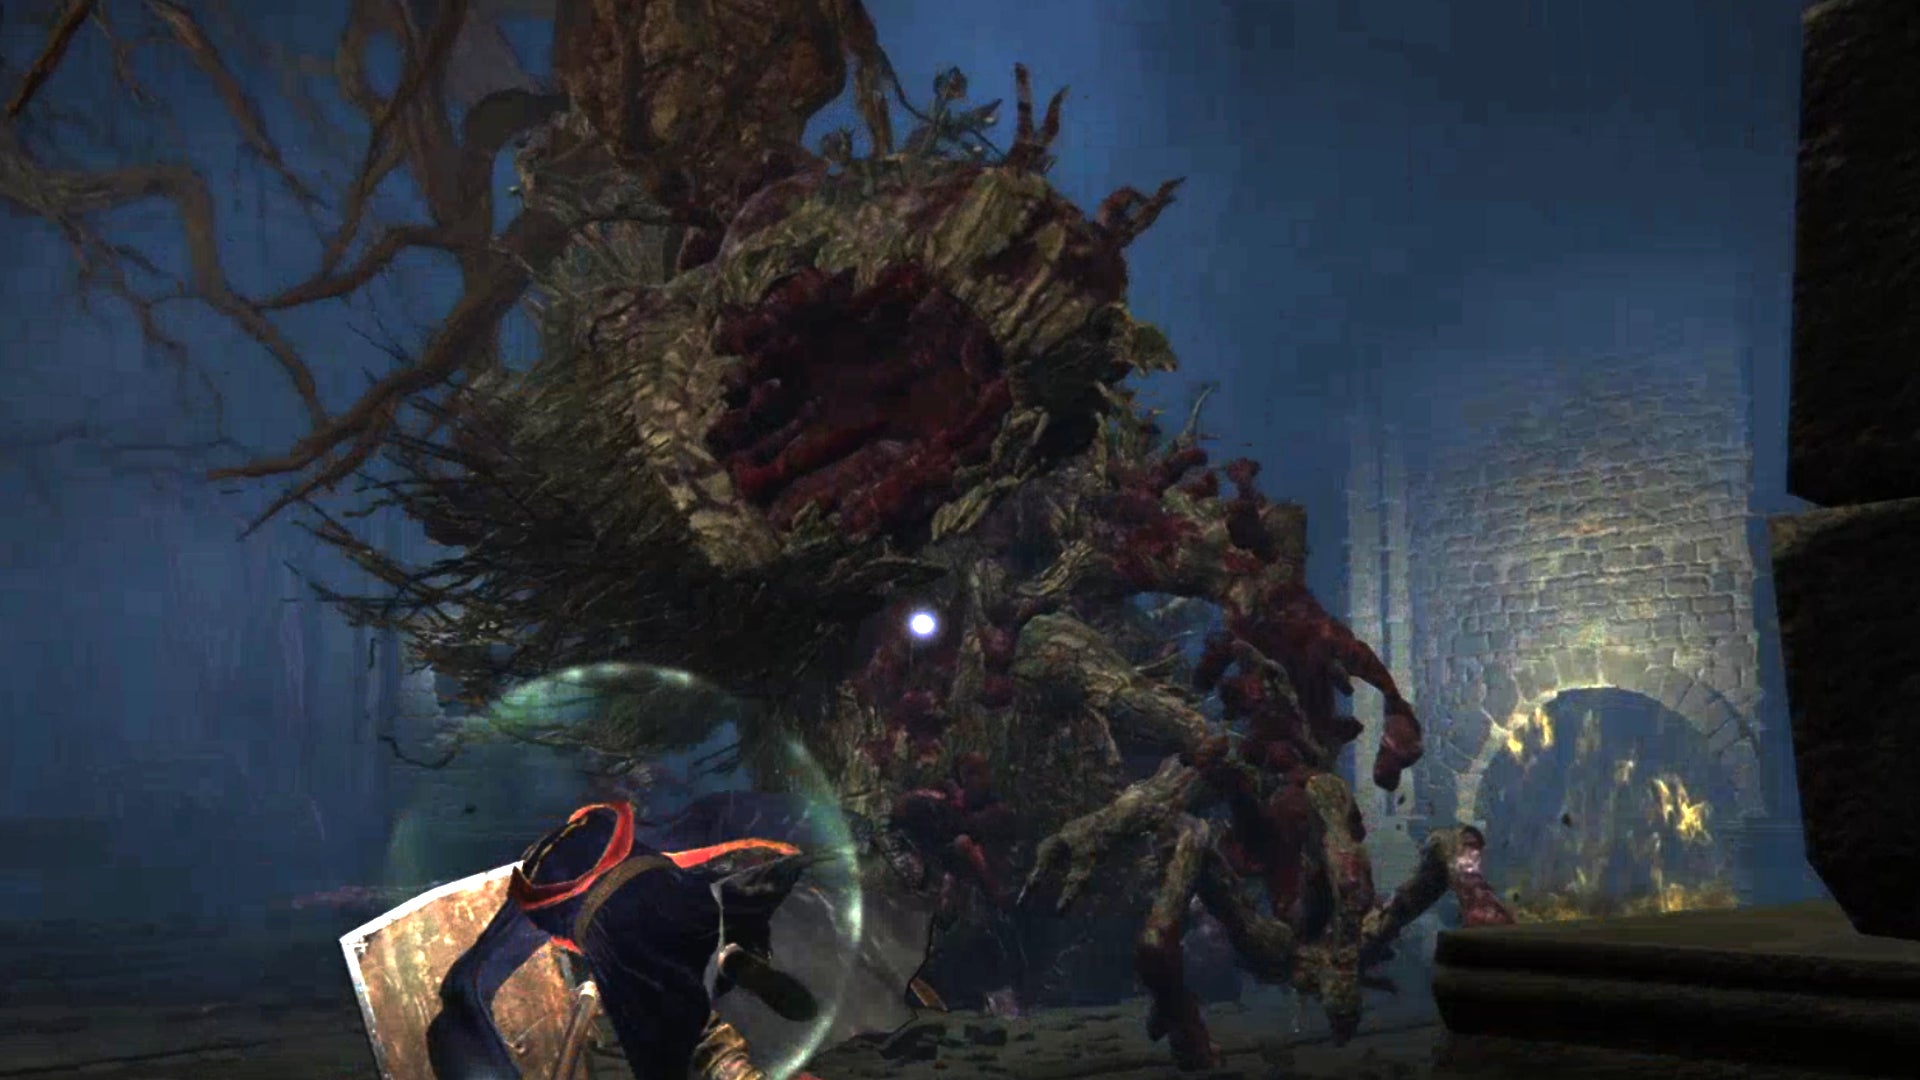 The Ulcerated Tree Spirit, a boss in Elden Ring, rears up and bites down towards the player.